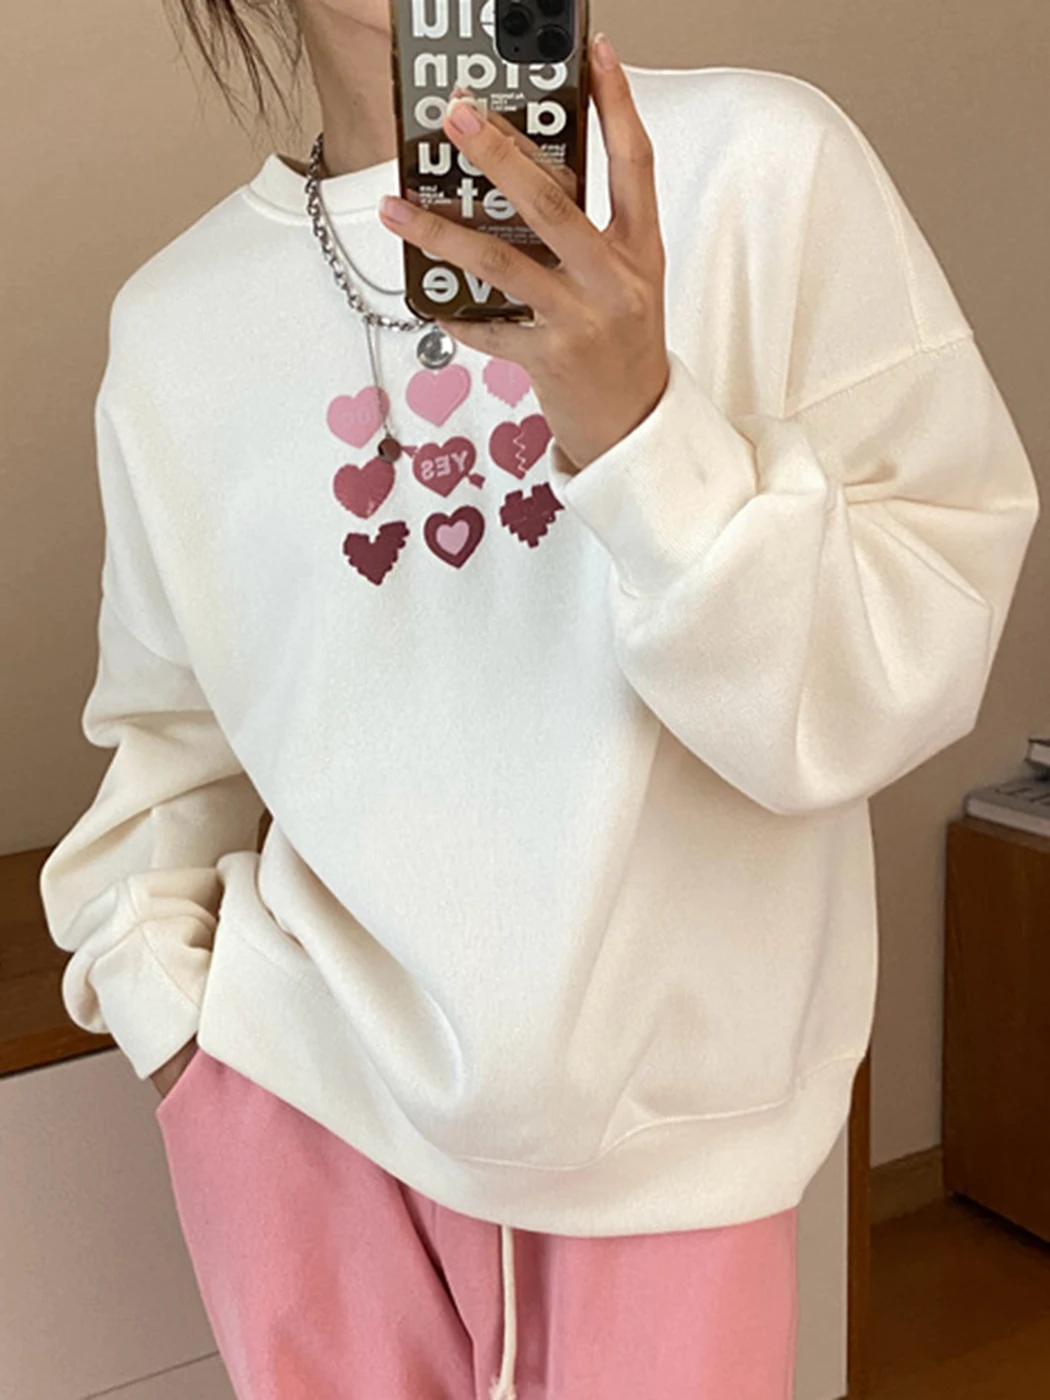 

Pirate Hippie Hearts Graphic Sweatshirt Woman 2022 Autumn Cotton Cozy Pullovers Femme Casual Fashion Creative Pull Hoodie Tops